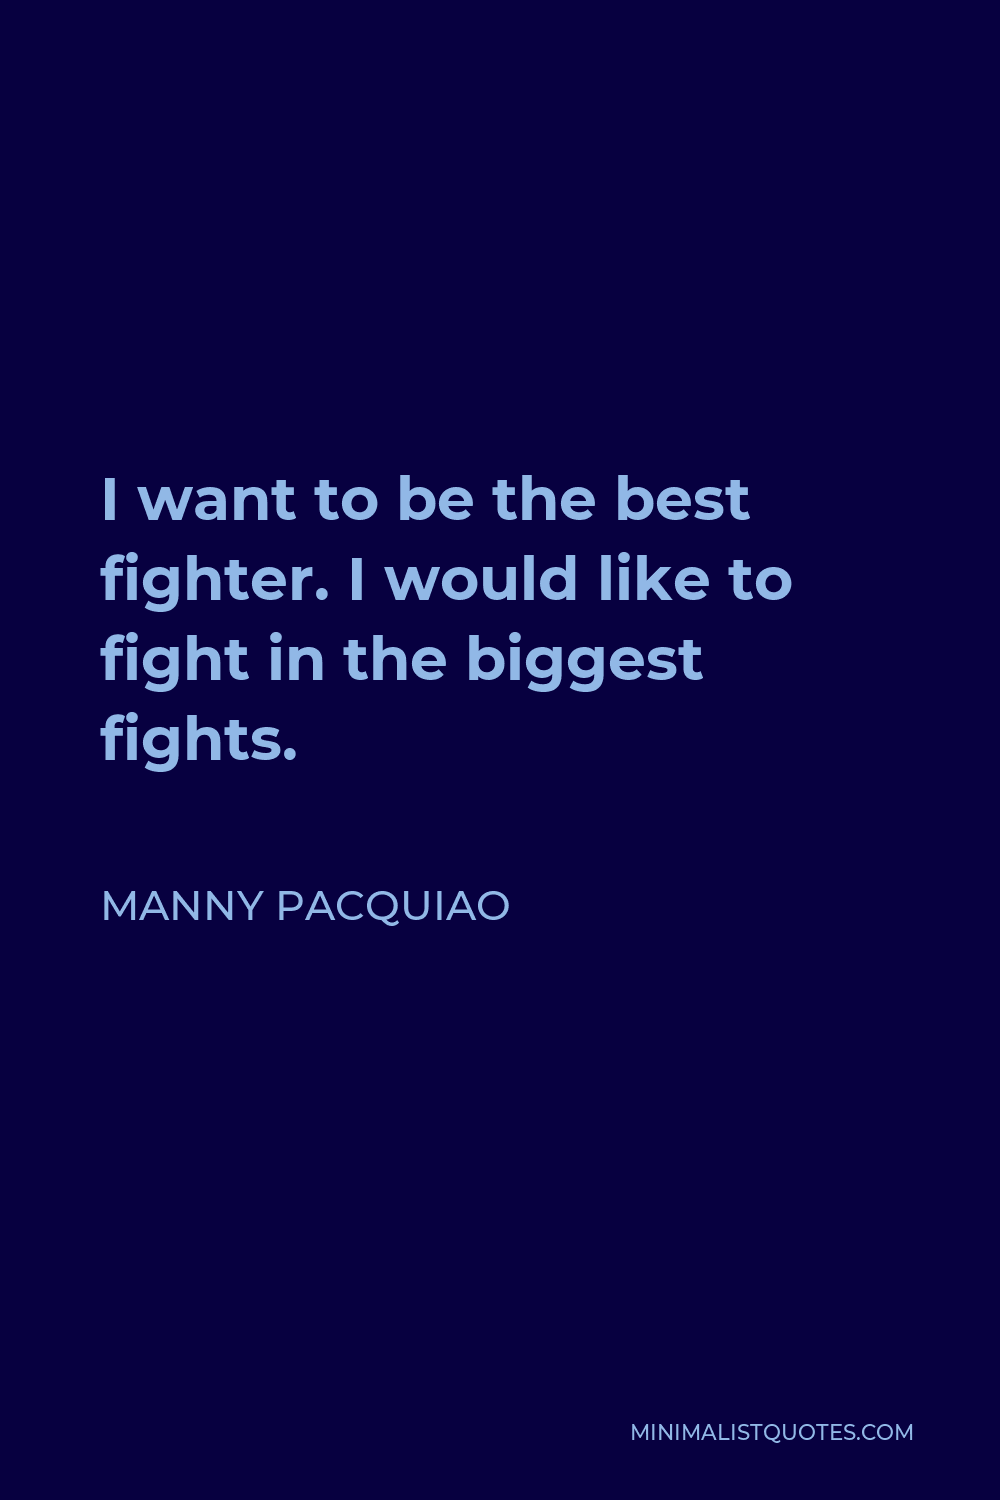 Manny Pacquiao Quote - I want to be the best fighter. I would like to fight in the biggest fights.